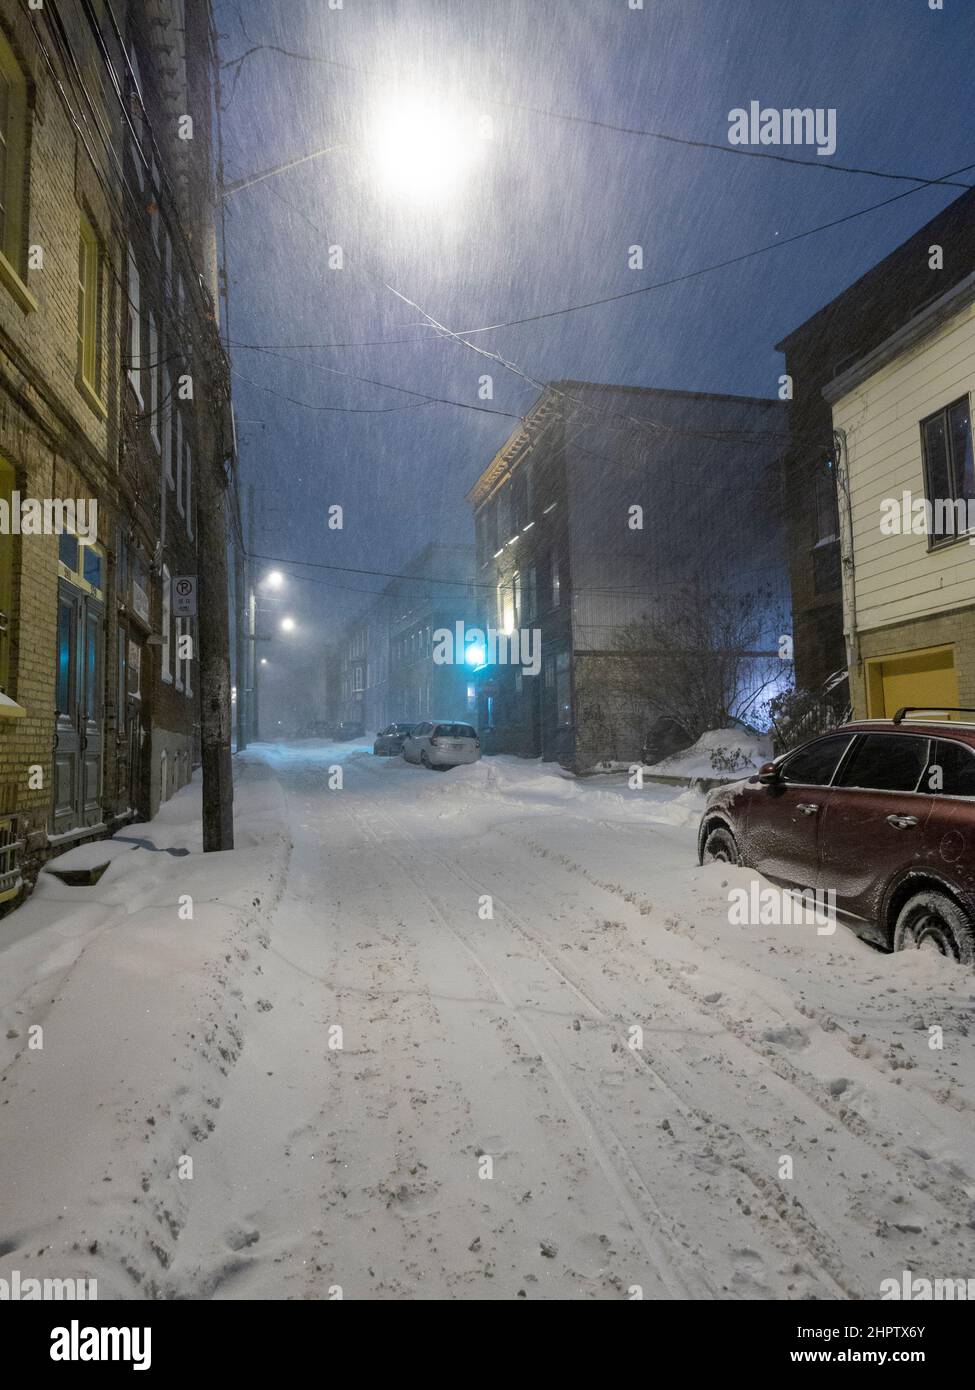 Evening Snowstorm in Quebec City: Snow sworls around a stretlight on a narrow Quebec City street. The street is quickly filling with snow and parked cars are snowed in. Stock Photo